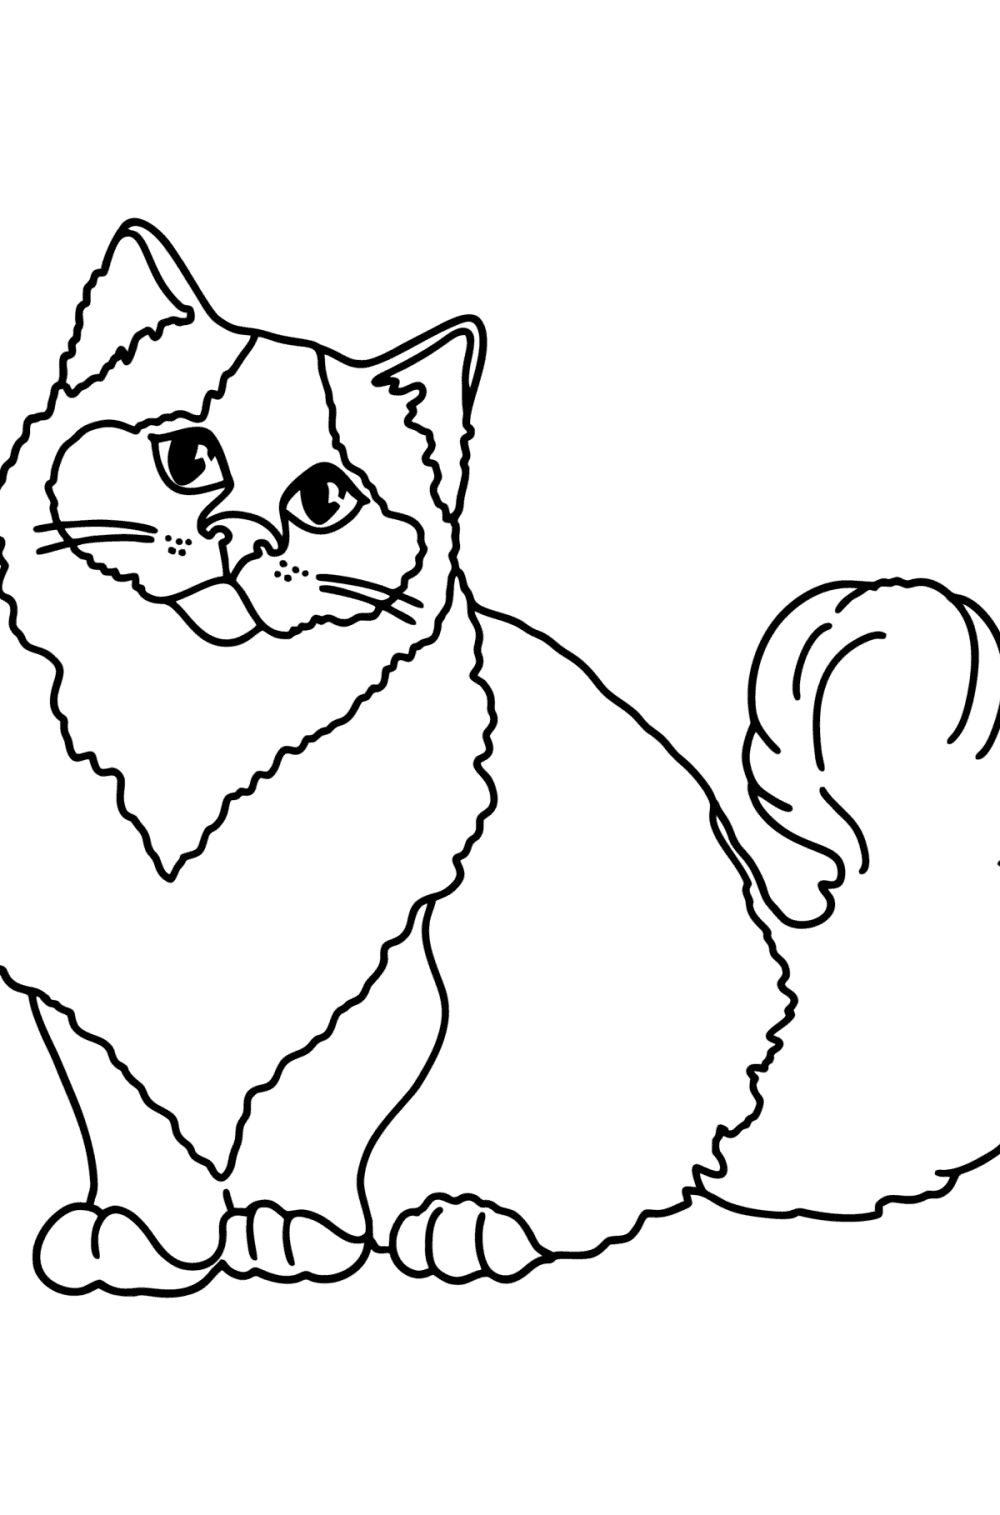 Coloring pages for Kids - Play online for Free & Fun